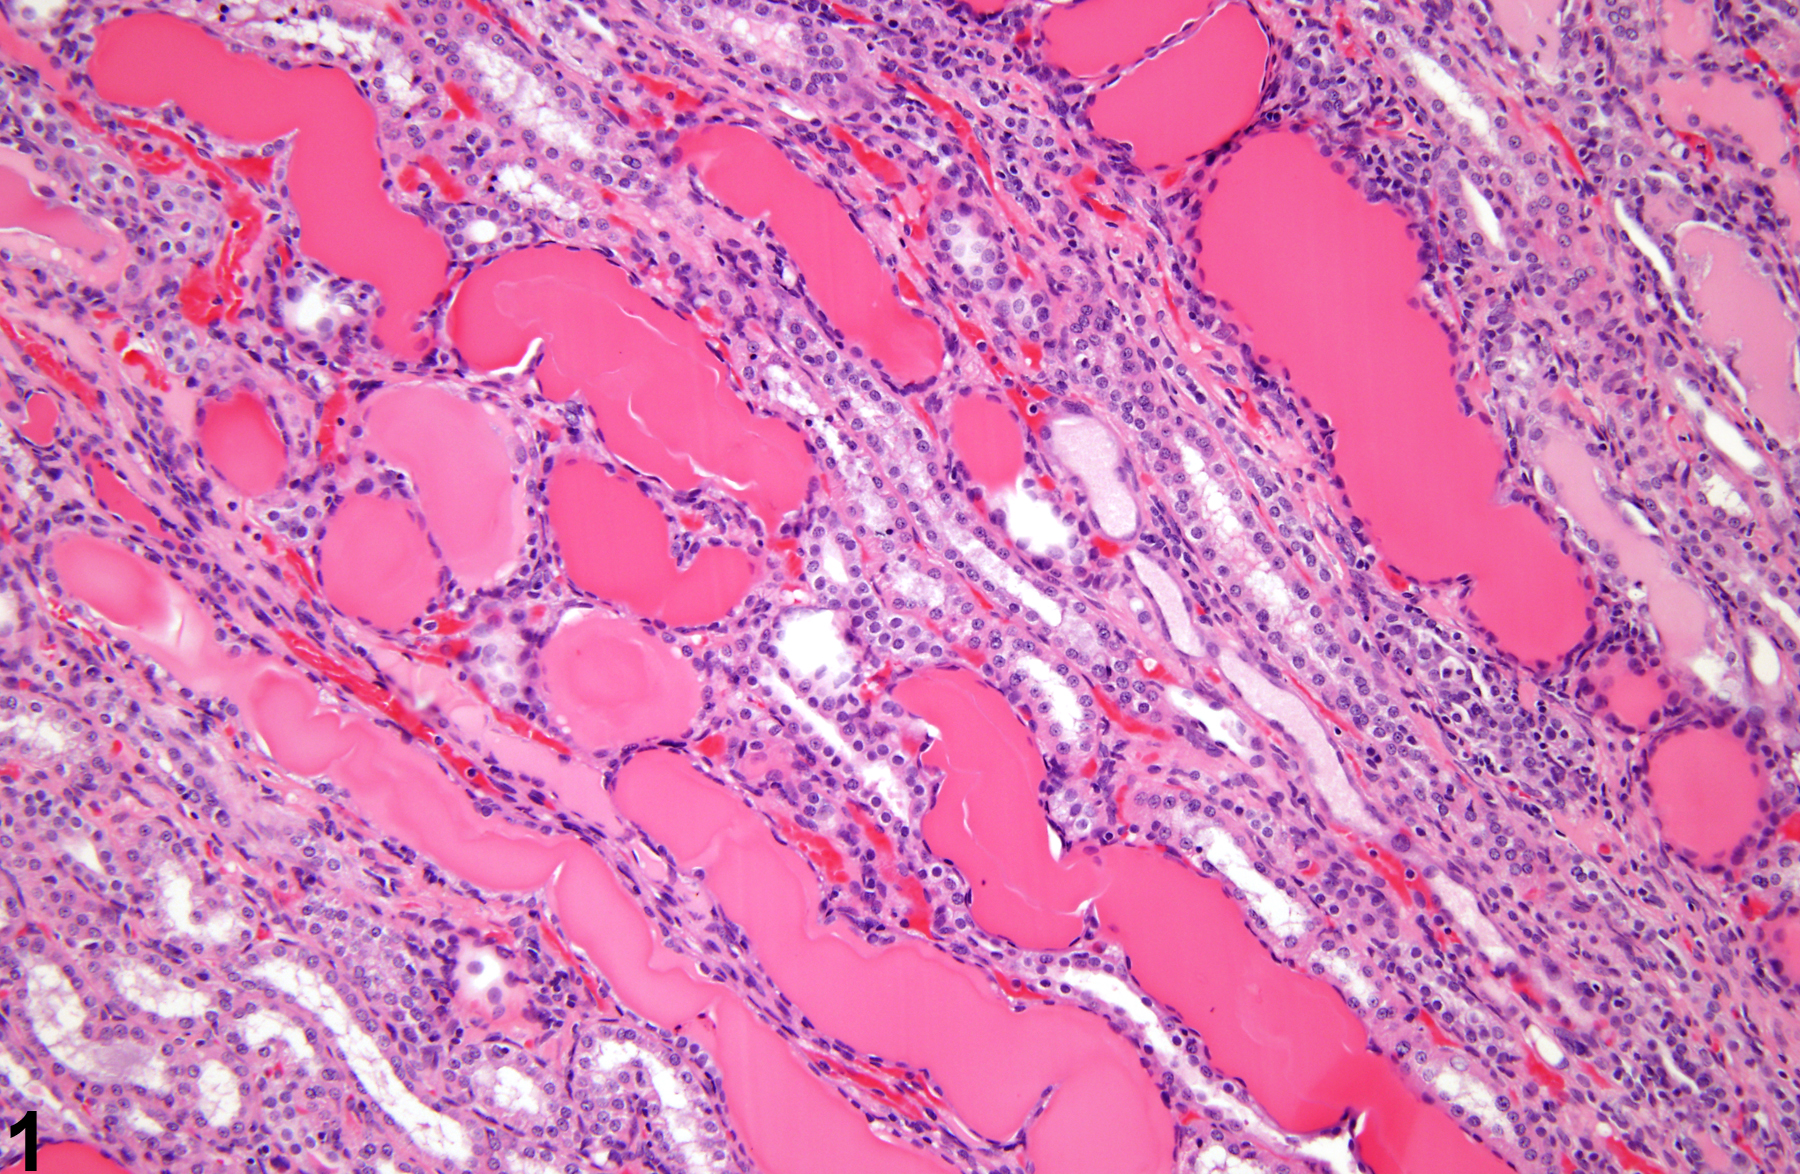 Image of renal tubule cast in the kidney from a male F344/N rat in a chronic study